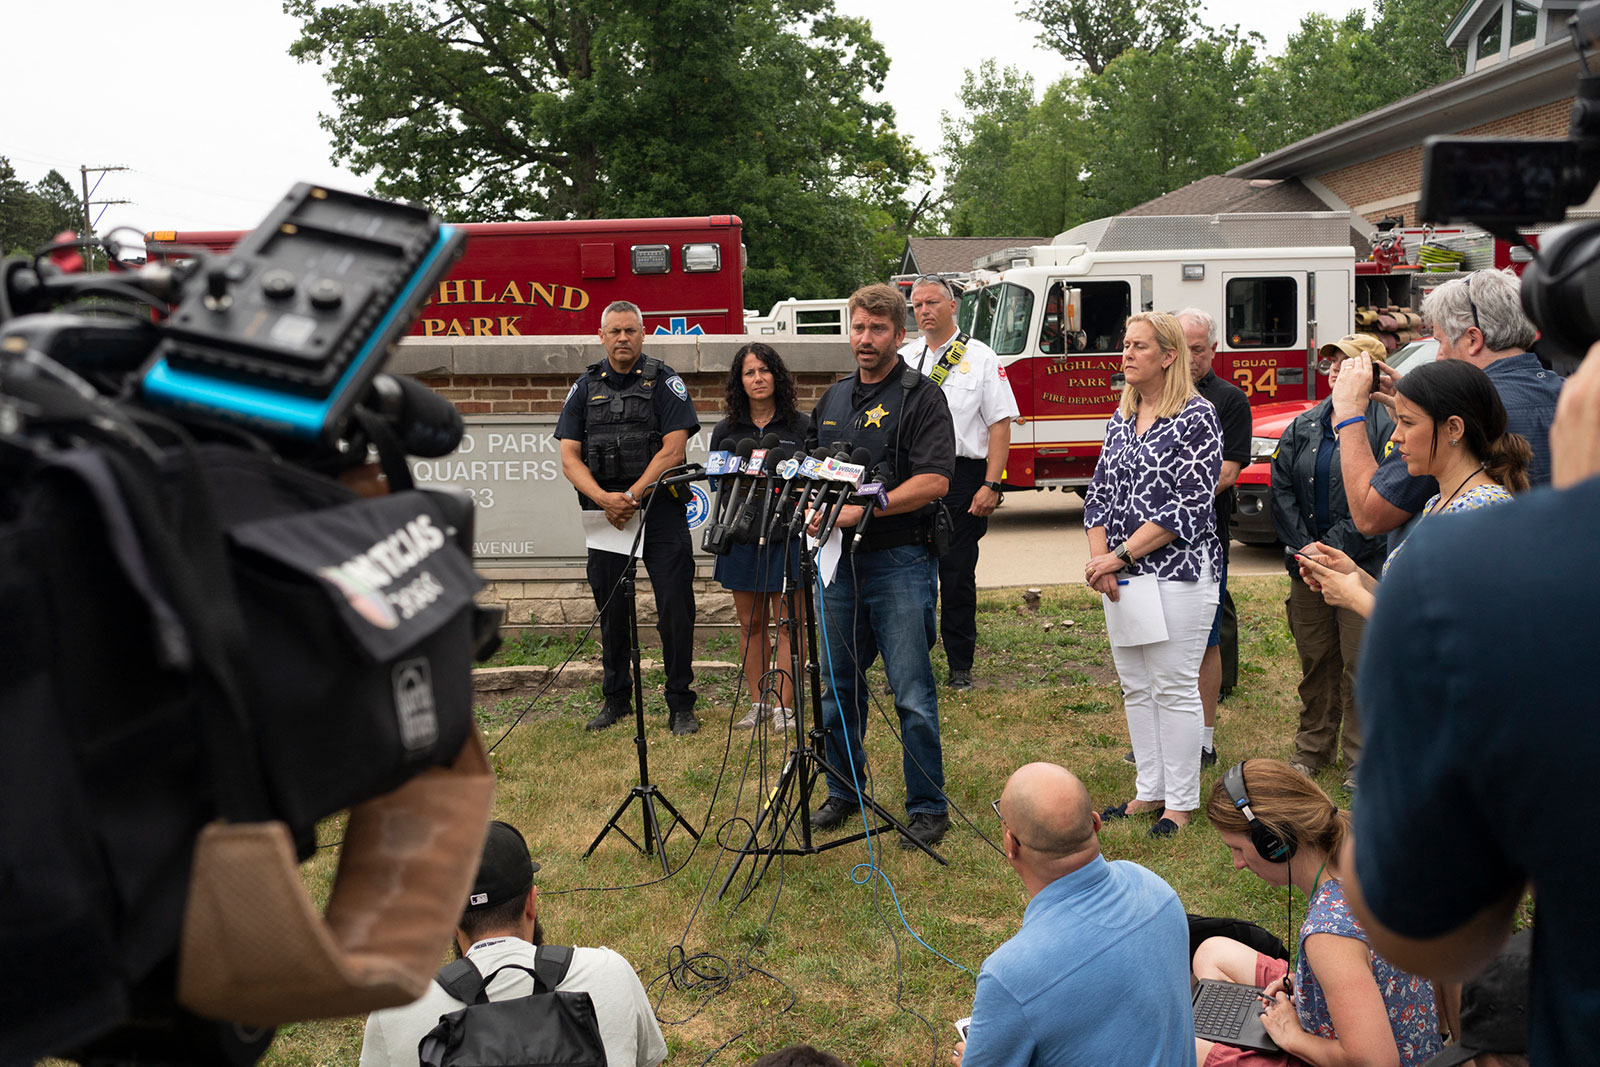 Sgt. Chris Covelli speaks at the scene of the Fourth of July parade shooting in Highland Park, Illinois, on July 4.